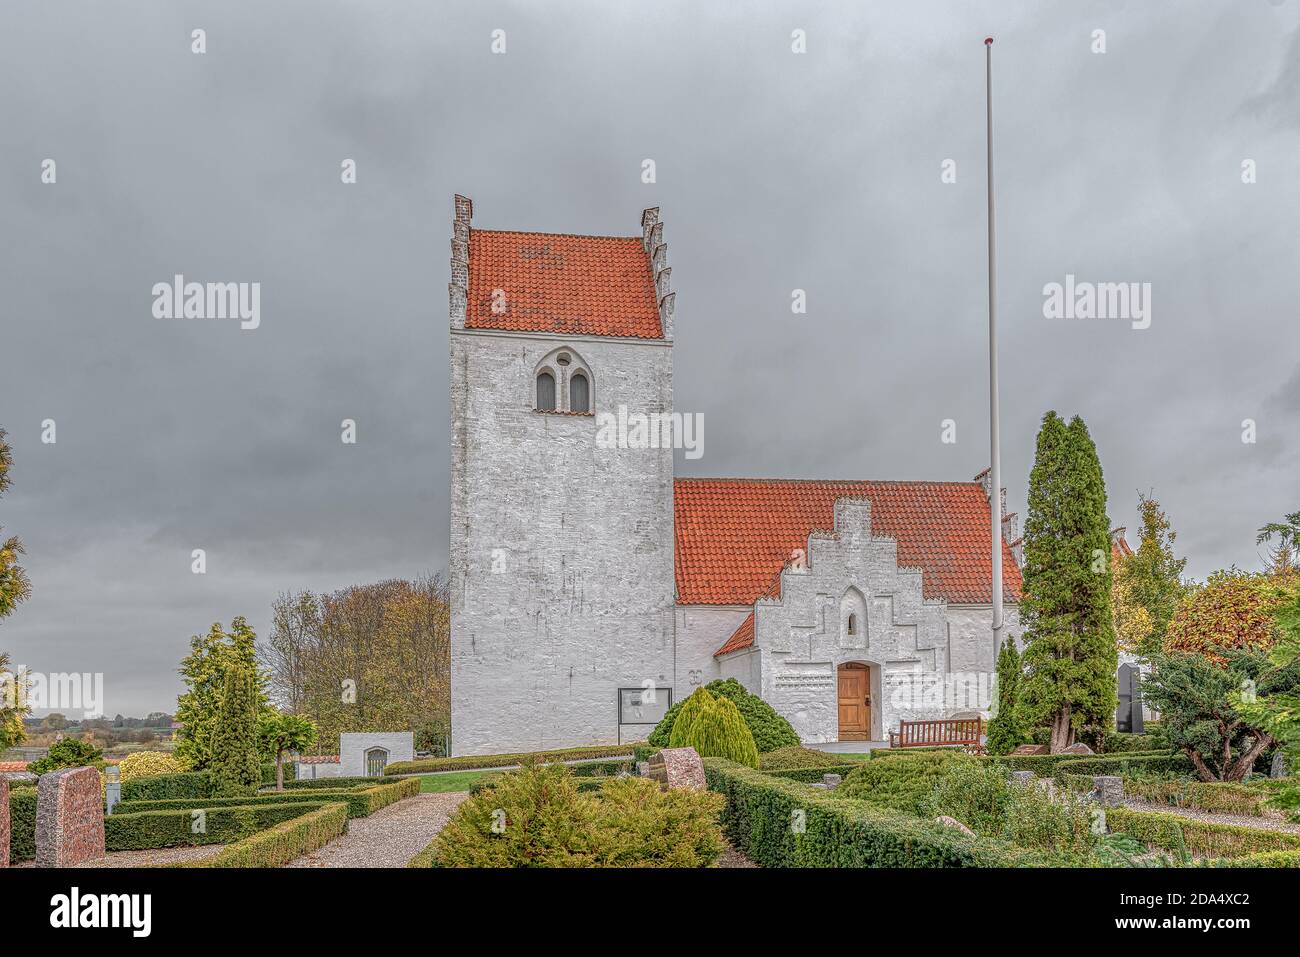 A medieval white stone-churh with a belltower in the danish countryside, Tuse, Denmark, November 5, 2020 Stock Photo